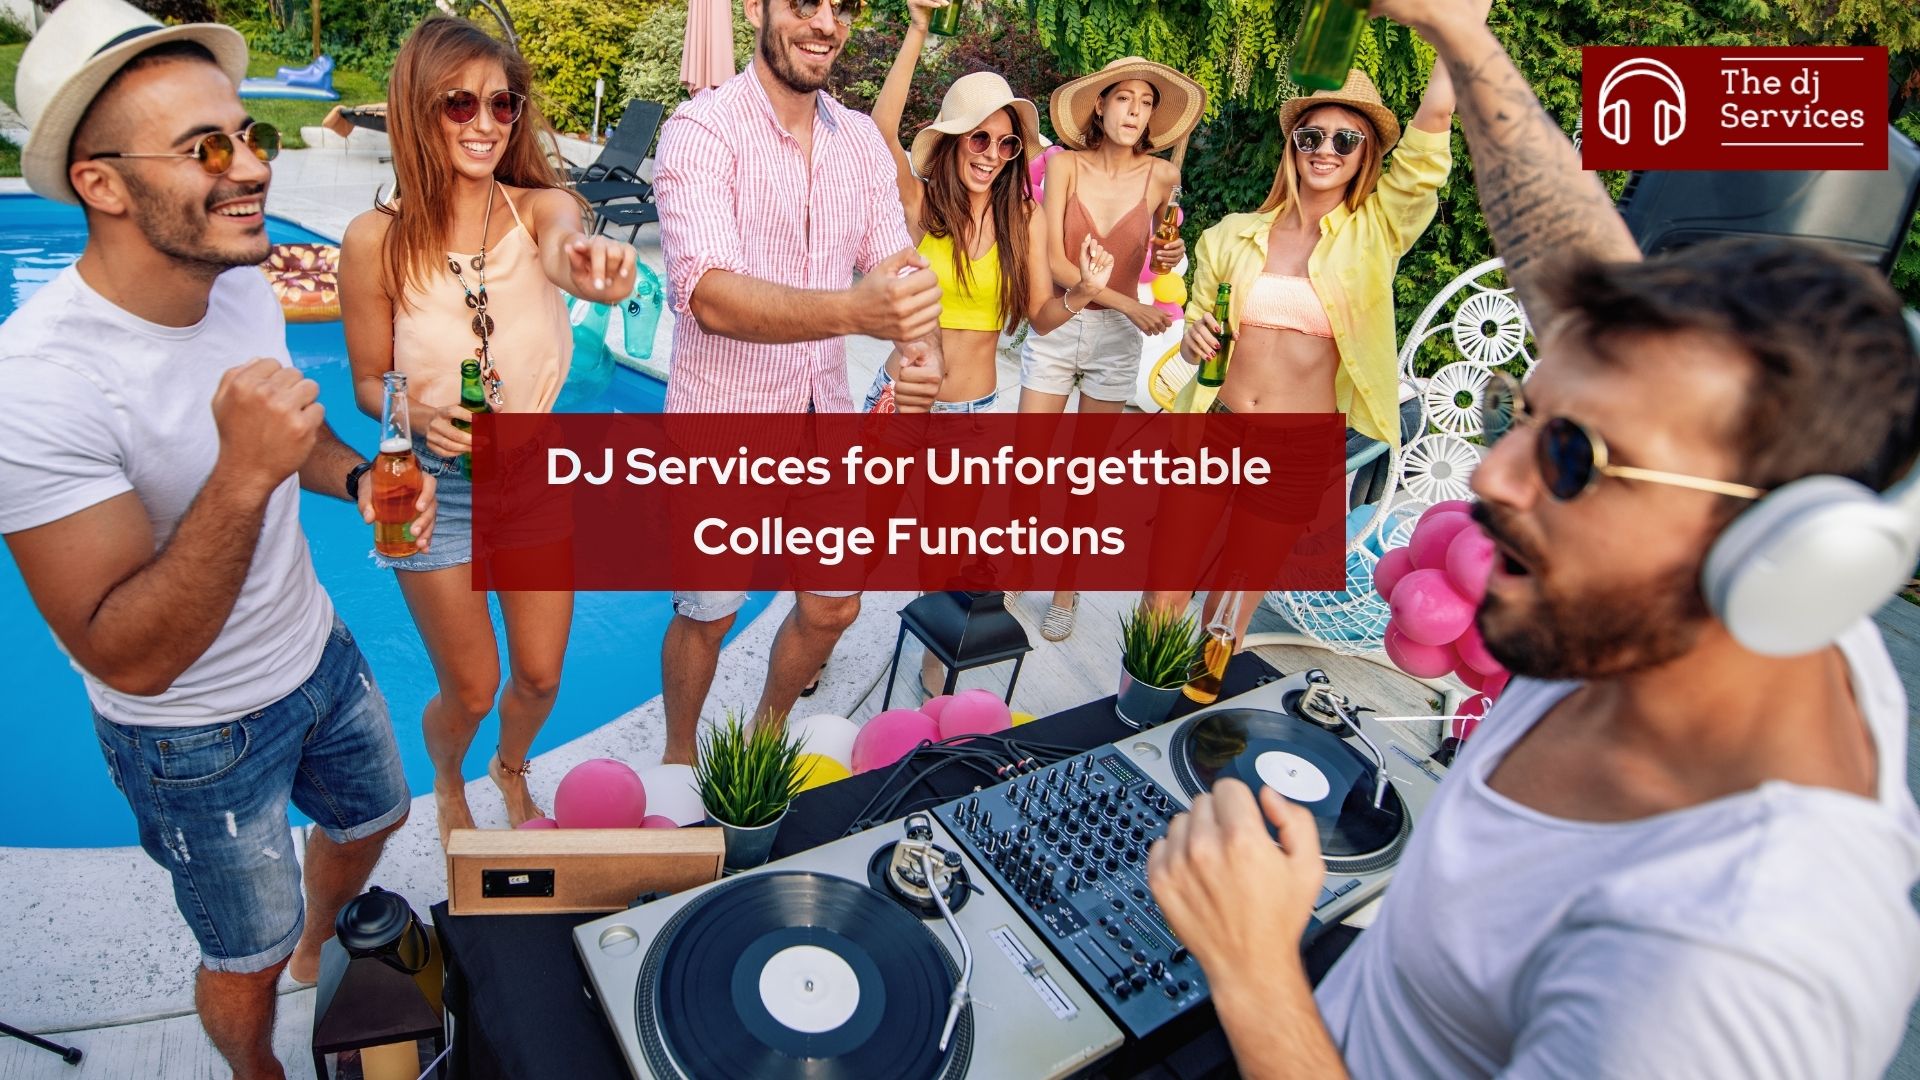 DJ Services for Unforgettable College Functions